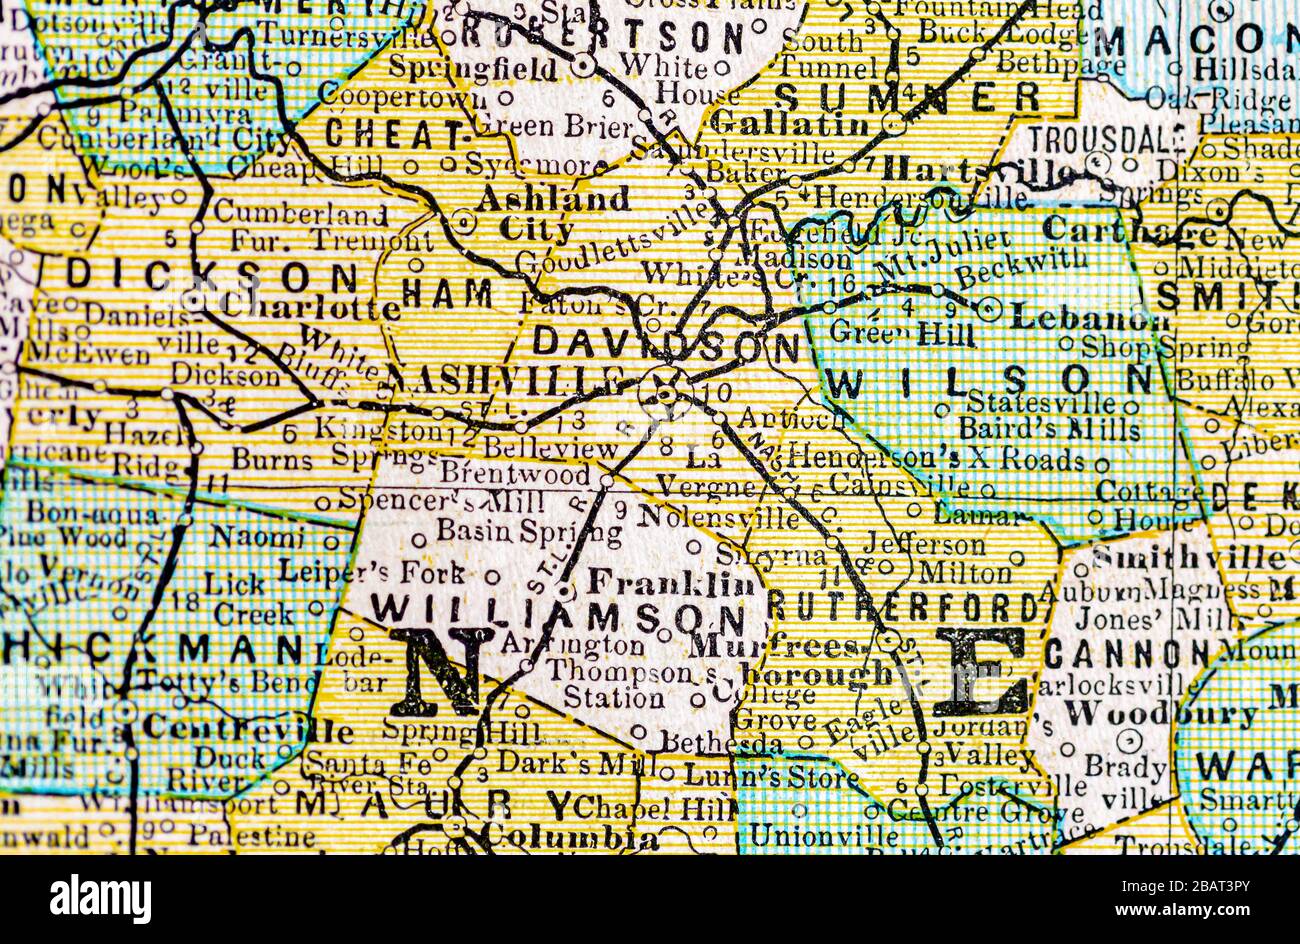 detail image of Middle Tennessee on an antique map Stock Photo